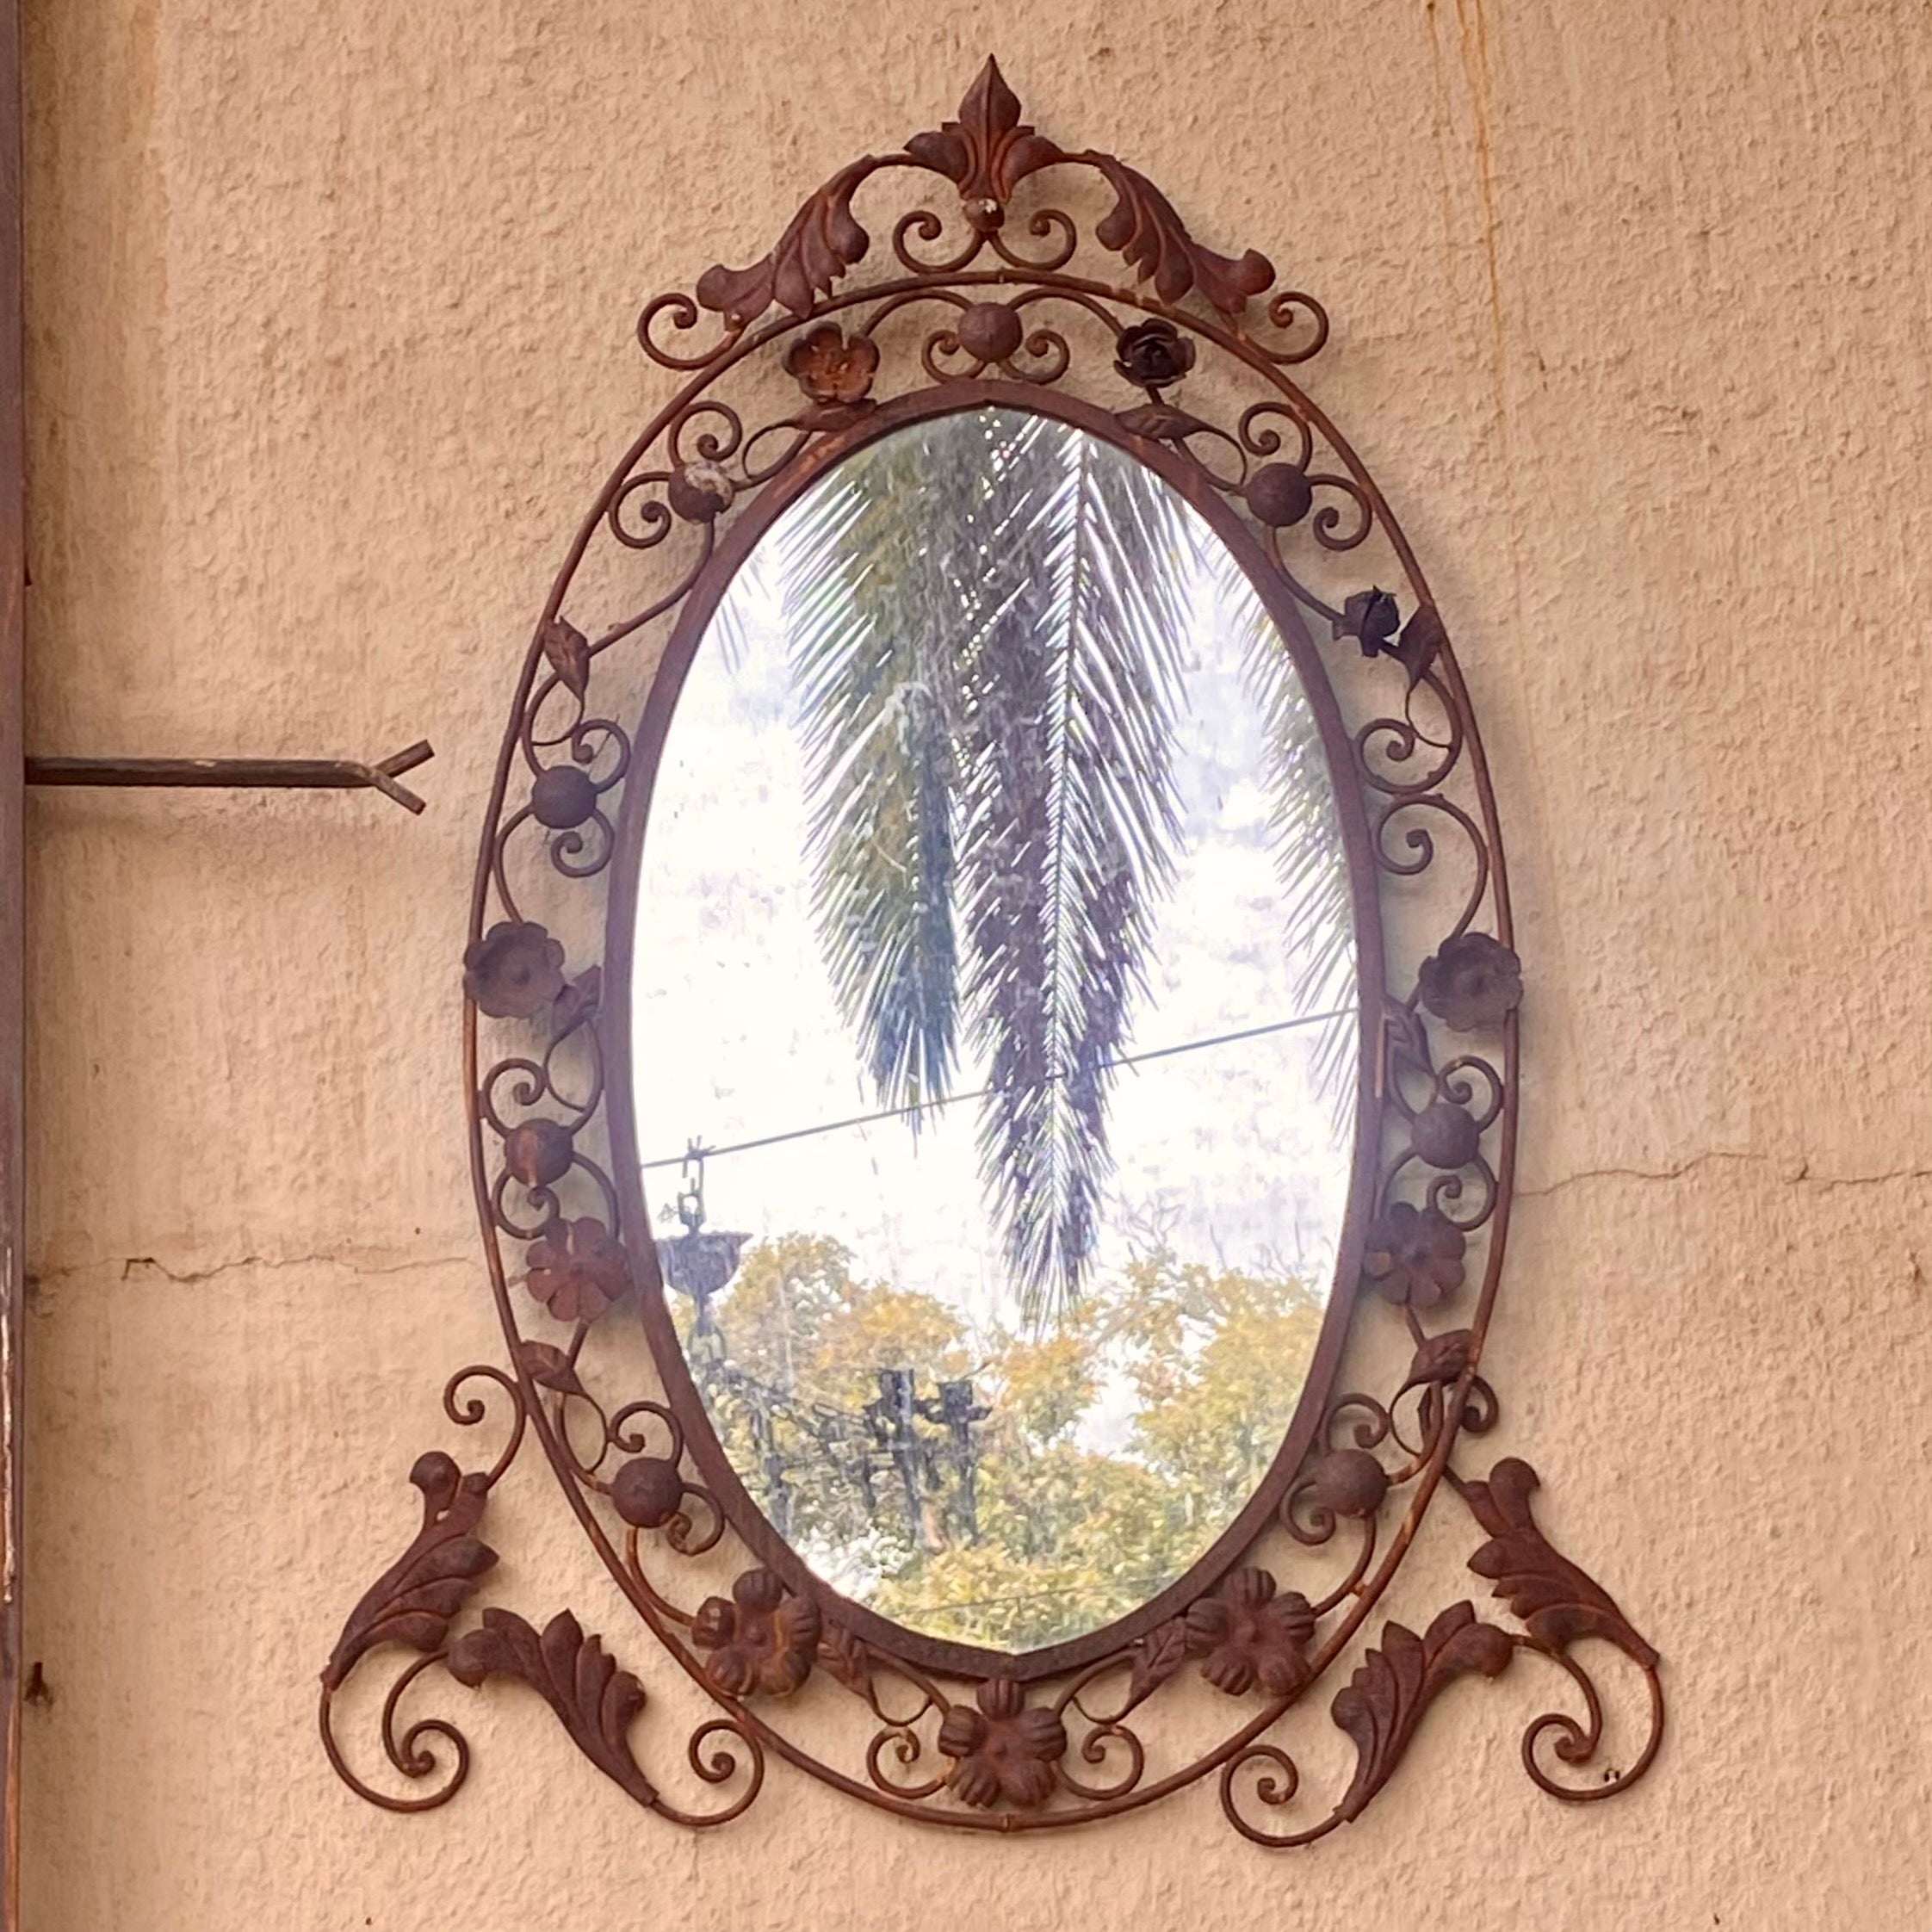 A Rusted Wrought Iron Mirror